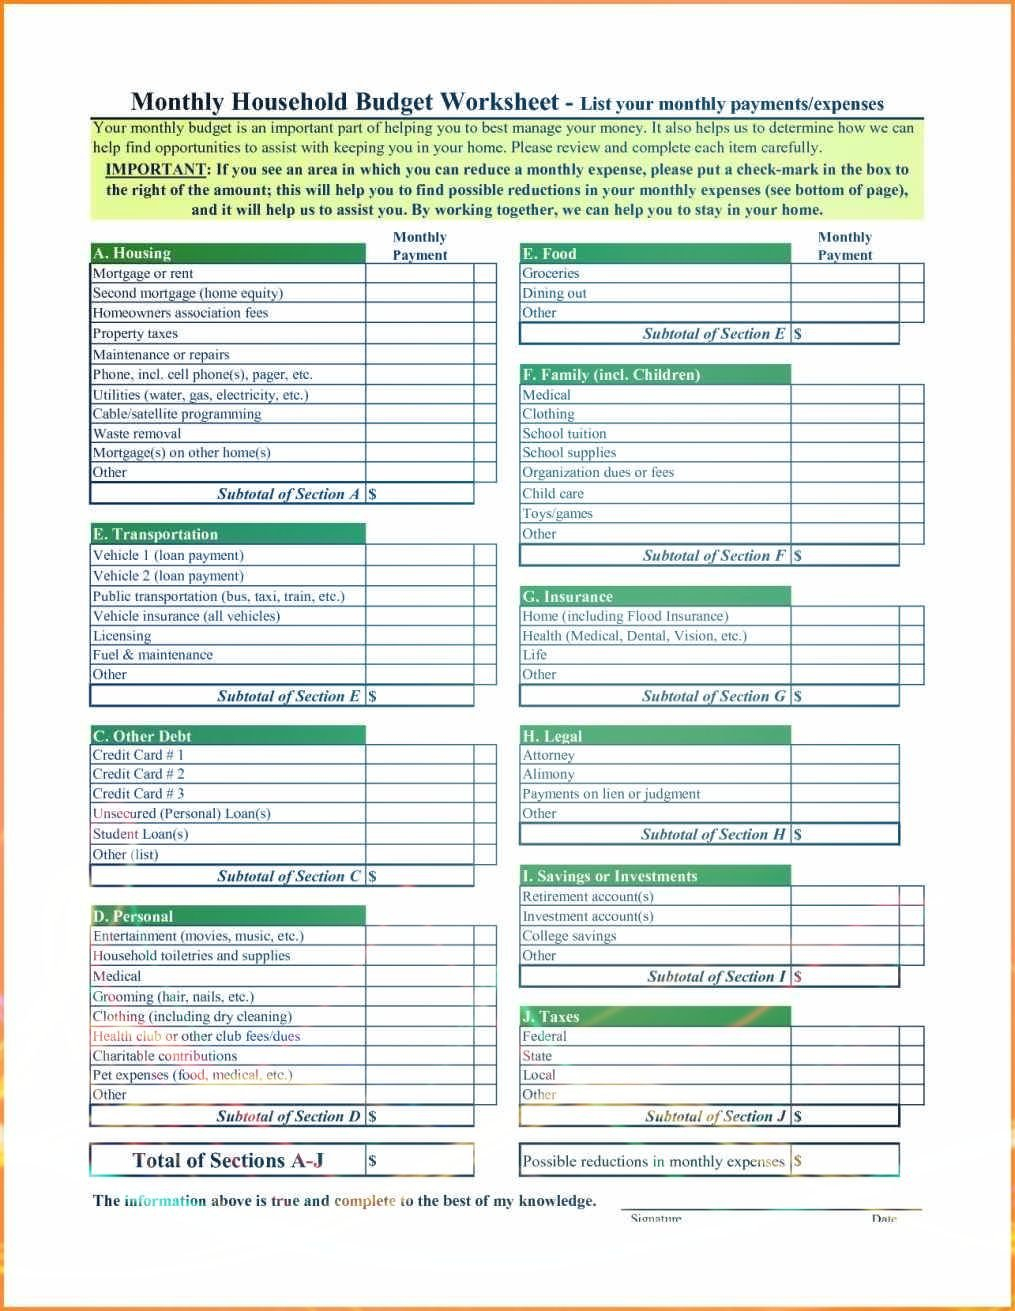 Donation Value Guide Spreadsheet In Pdf | Donation Value Guide ... In Donation Value Guide Spreadsheet